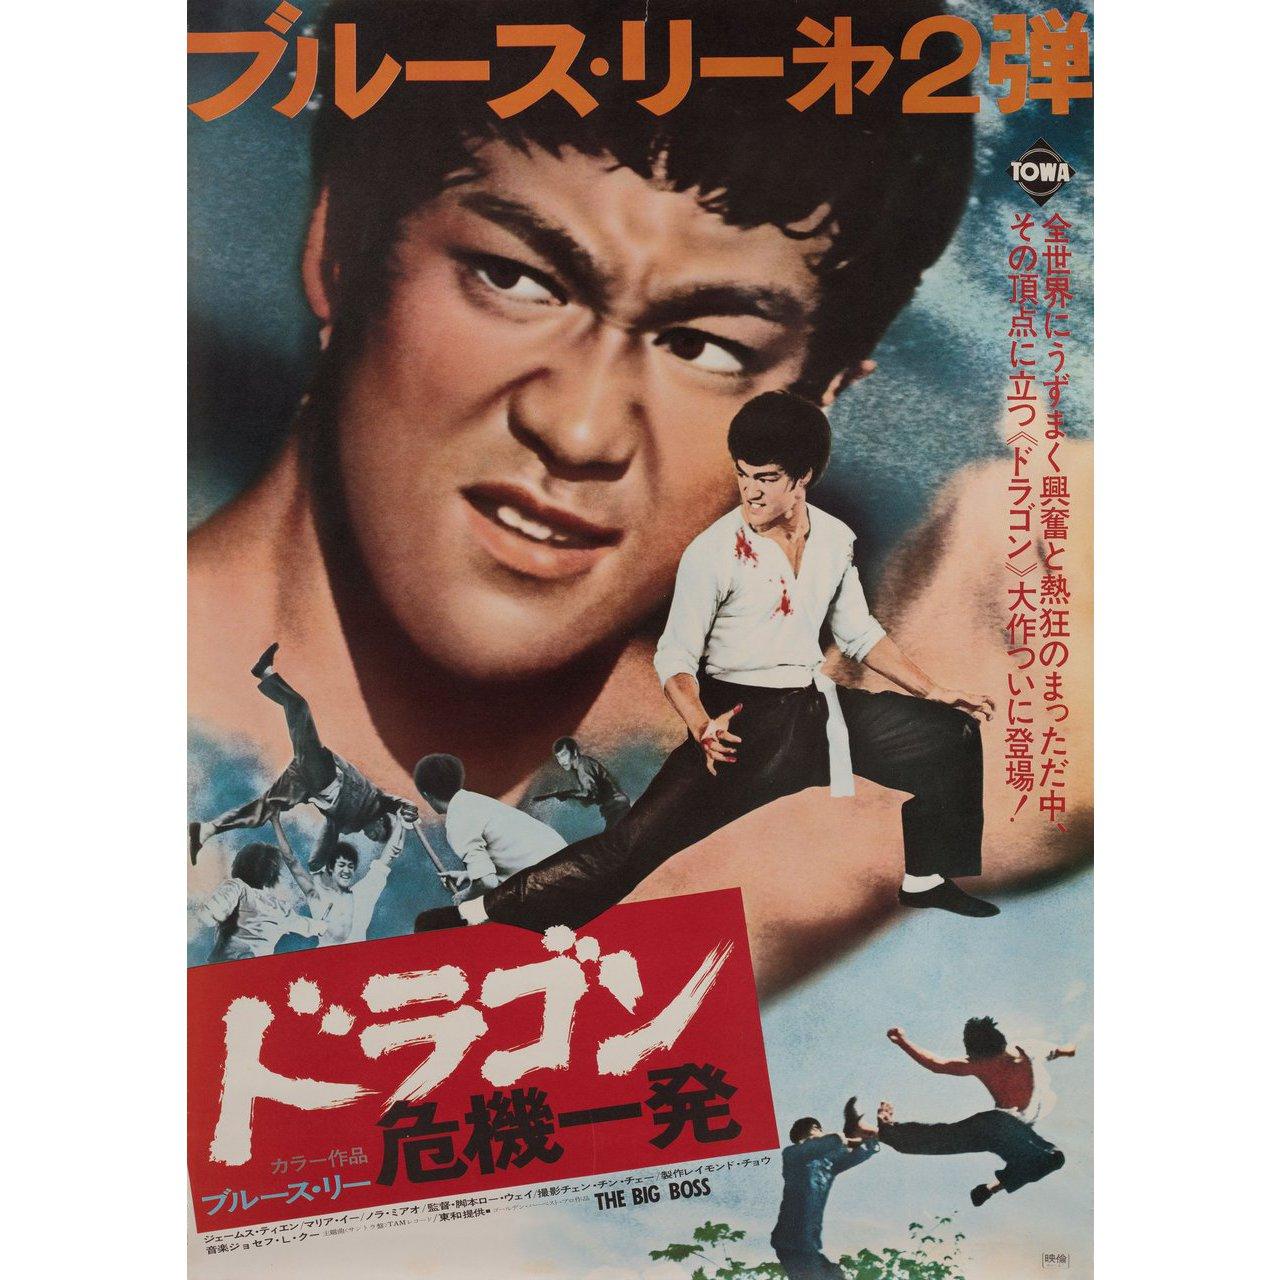 Original 1974 Japanese B2 poster for the first Japanese theatrical release of the 1971 film The Big Boss (Fists of Fury) directed by Wei Lo / Chia-hsiang Wu with Bruce Lee / Maria Yi / James Tien / Marilyn Bautista. Fine condition, rolled. Please